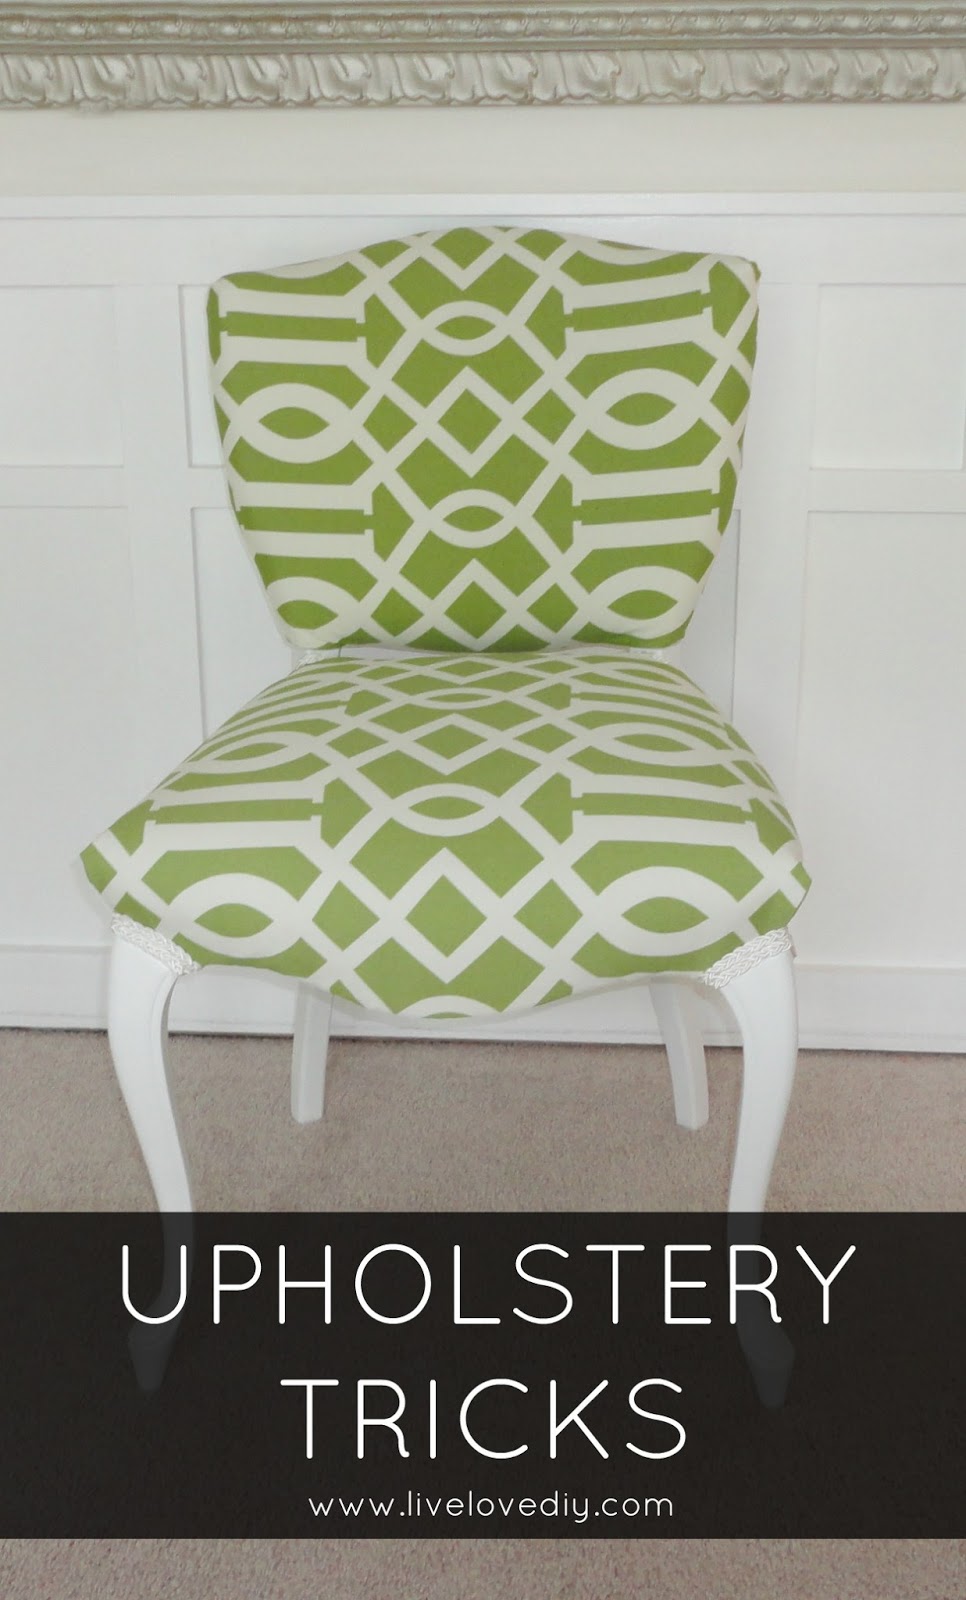 Quick Upholstery Tips and Tricks for YOU!